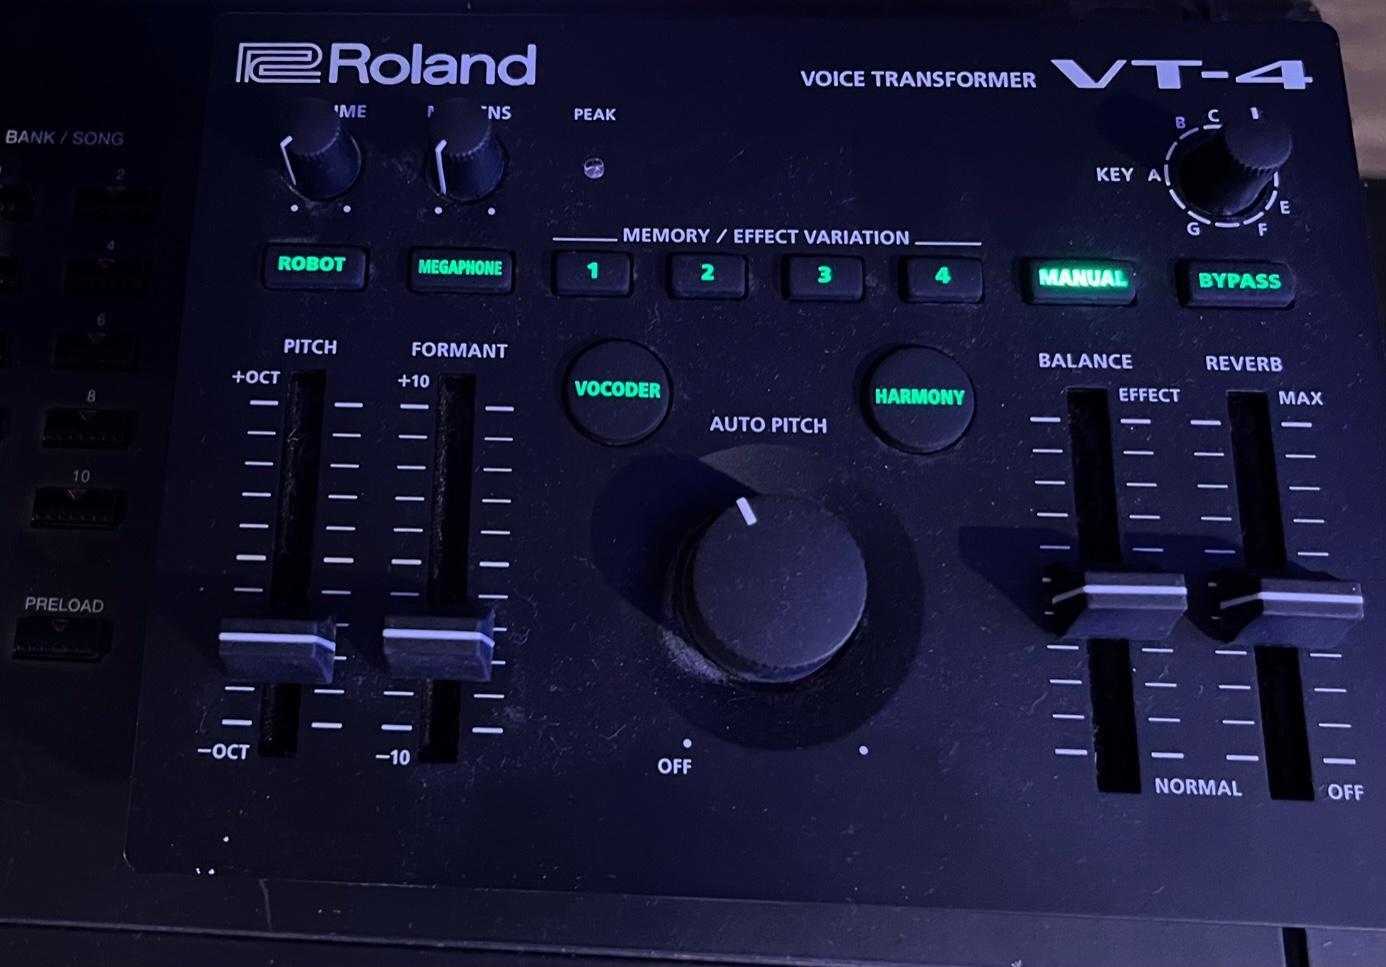 Used Roland VT-4 Voice Transformer & Effects Processor